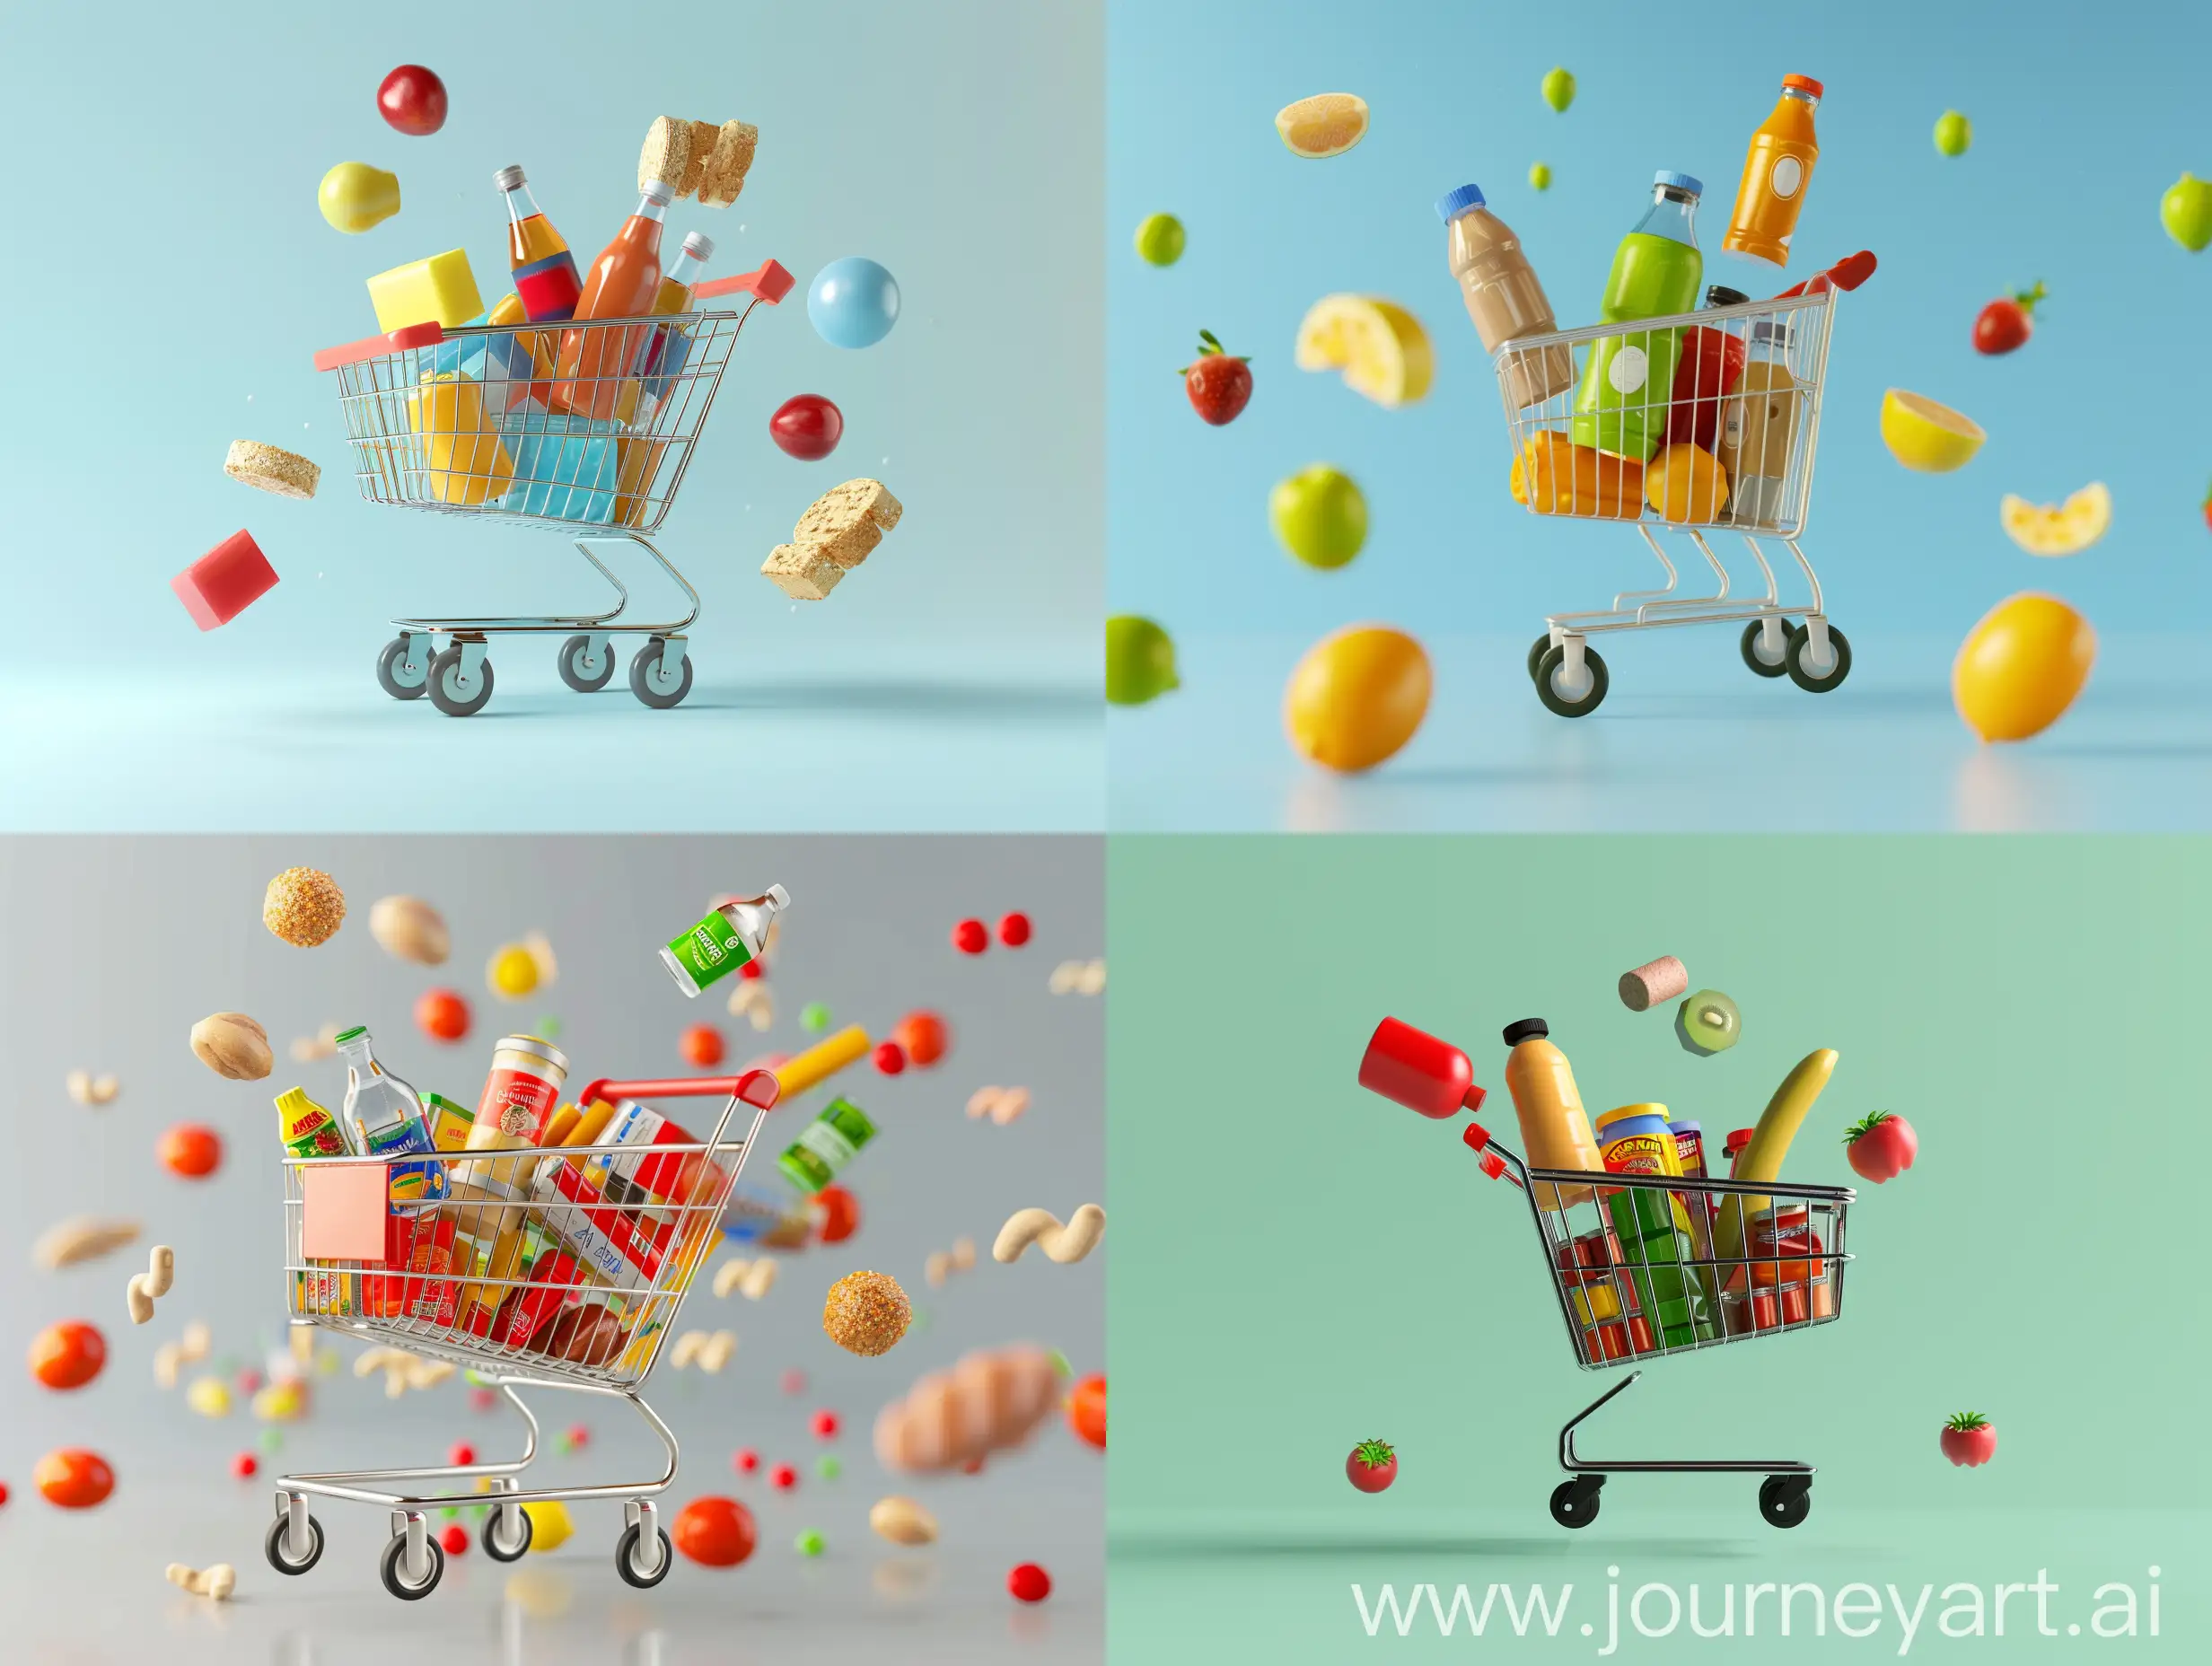 Diverse-Products-in-Hovering-Grocery-Cart-Realistic-3D-Illustration